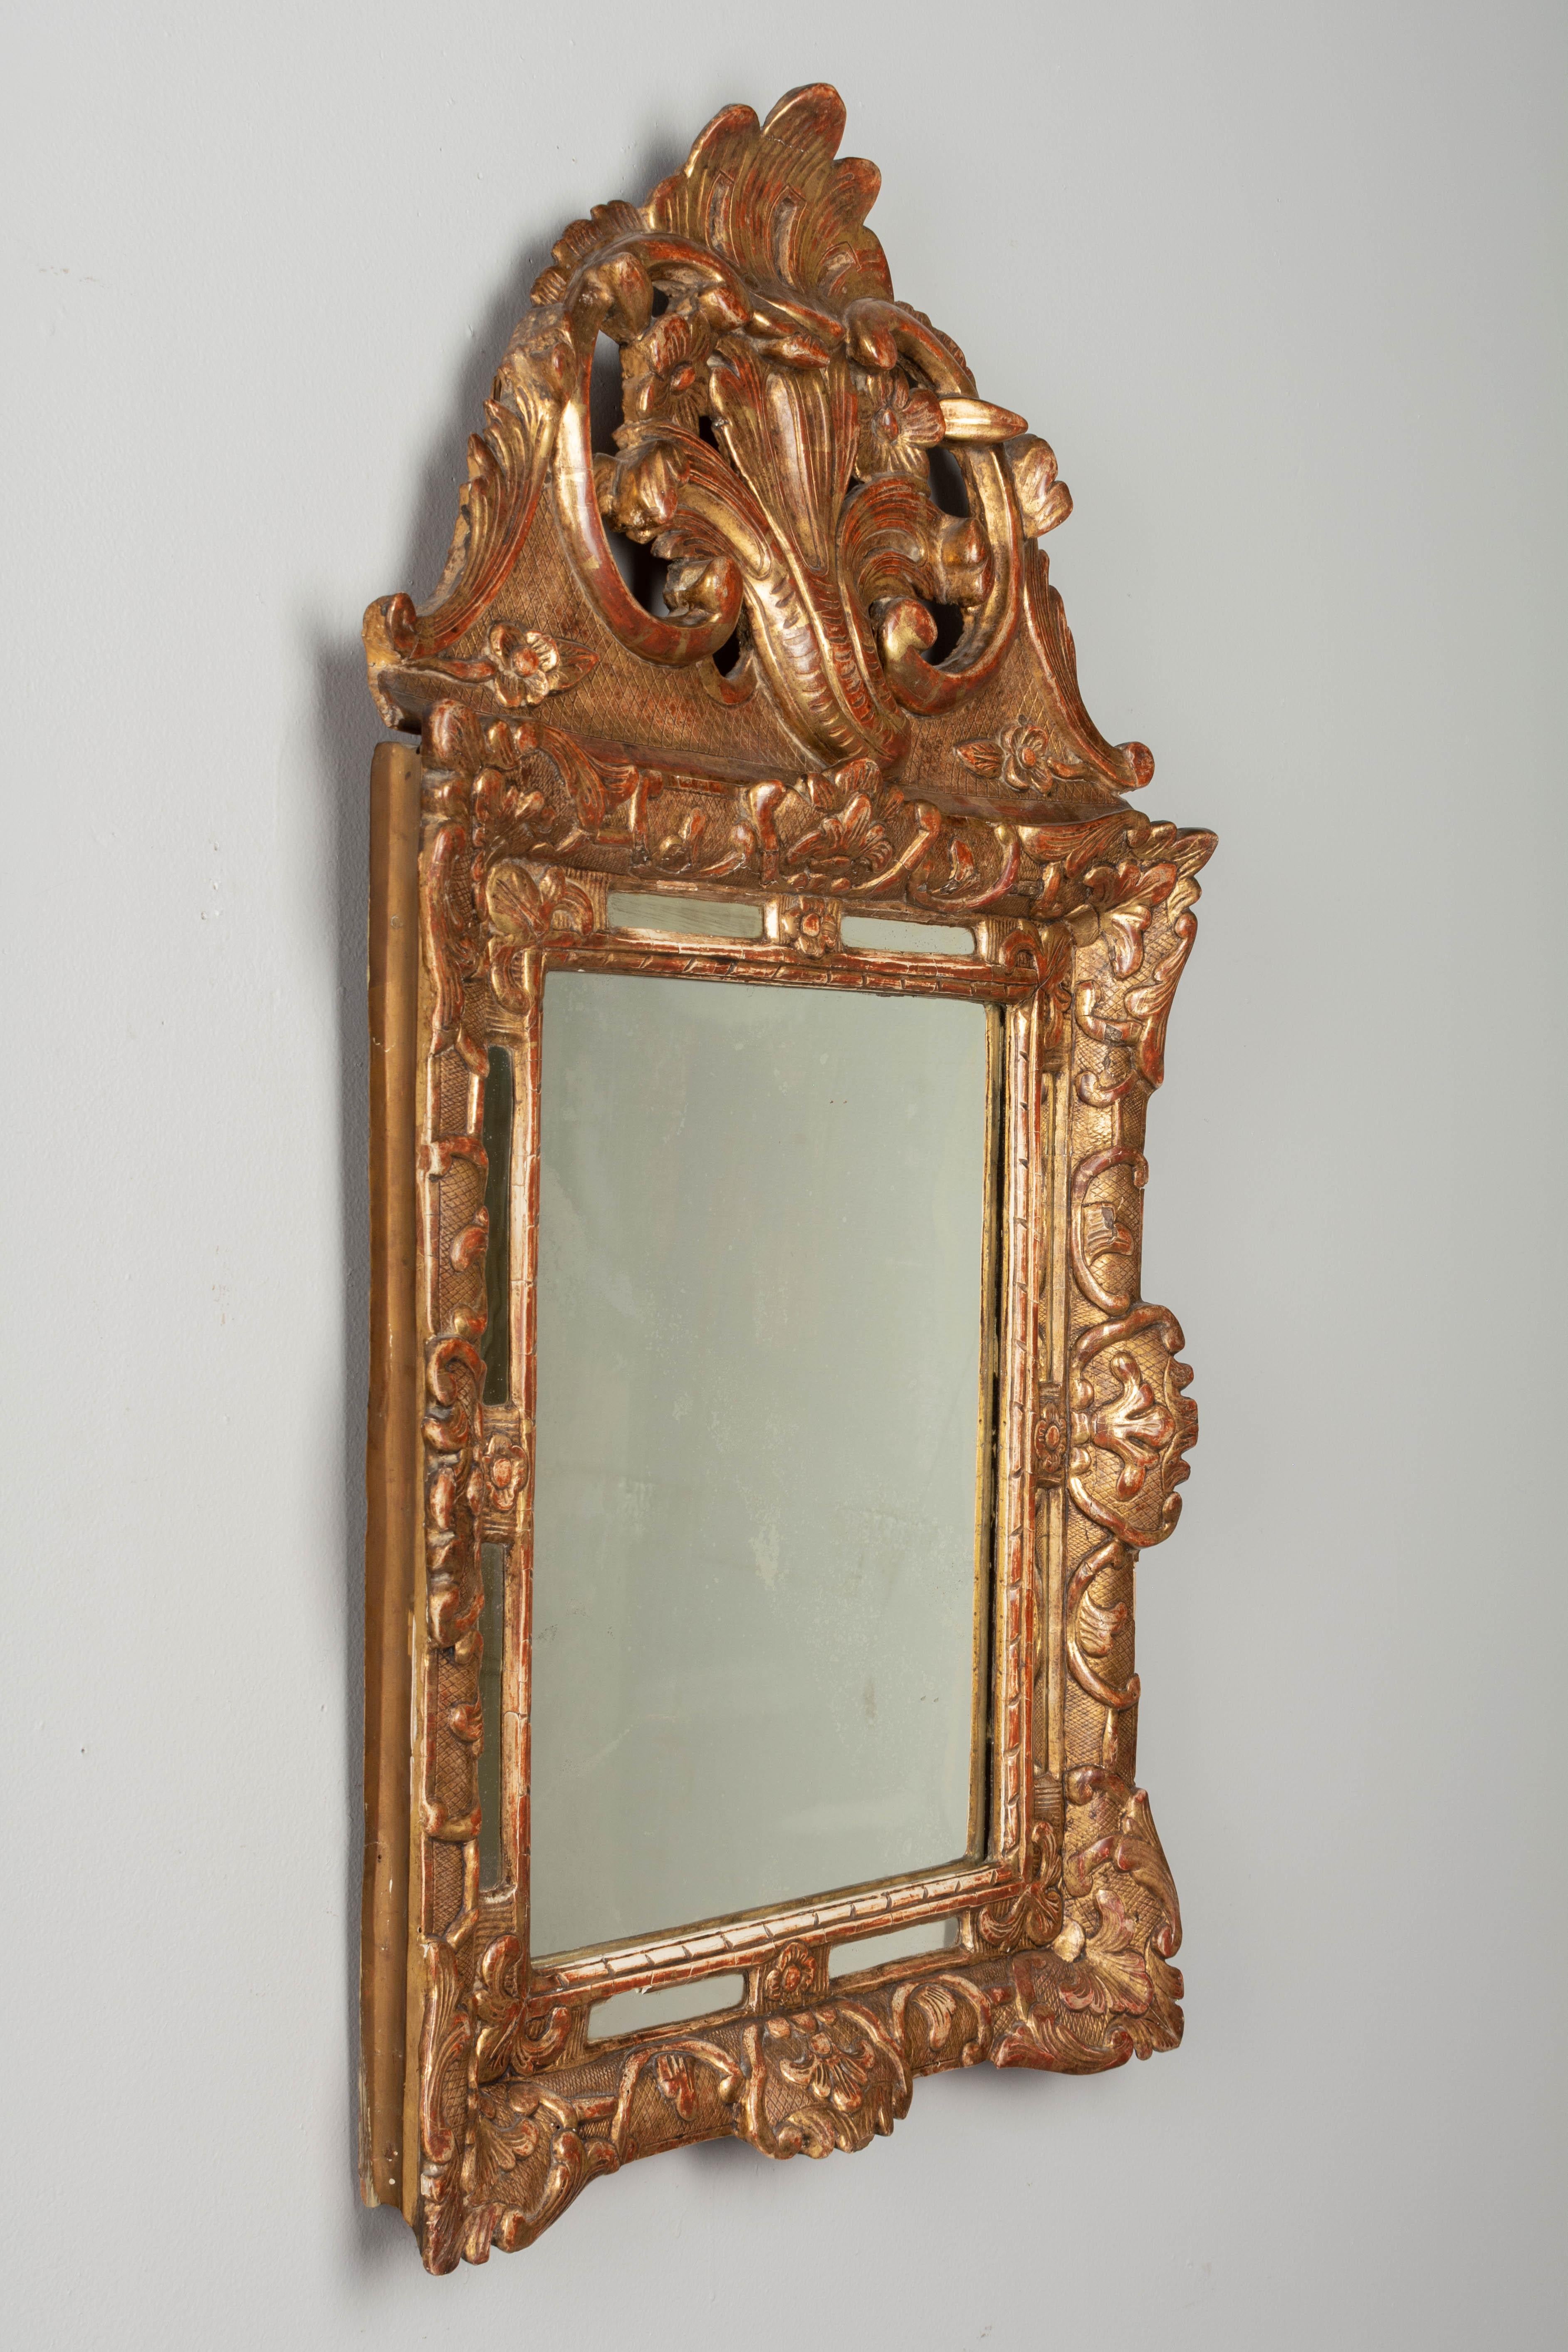 An early 19th century French Regence style giltwood parclose mirror with large boldly carved sculptural crest and elaborate floral and leaf form corner decorations. Warm gilt finish with red clay undertone. Original mirror with old silvering. Minor